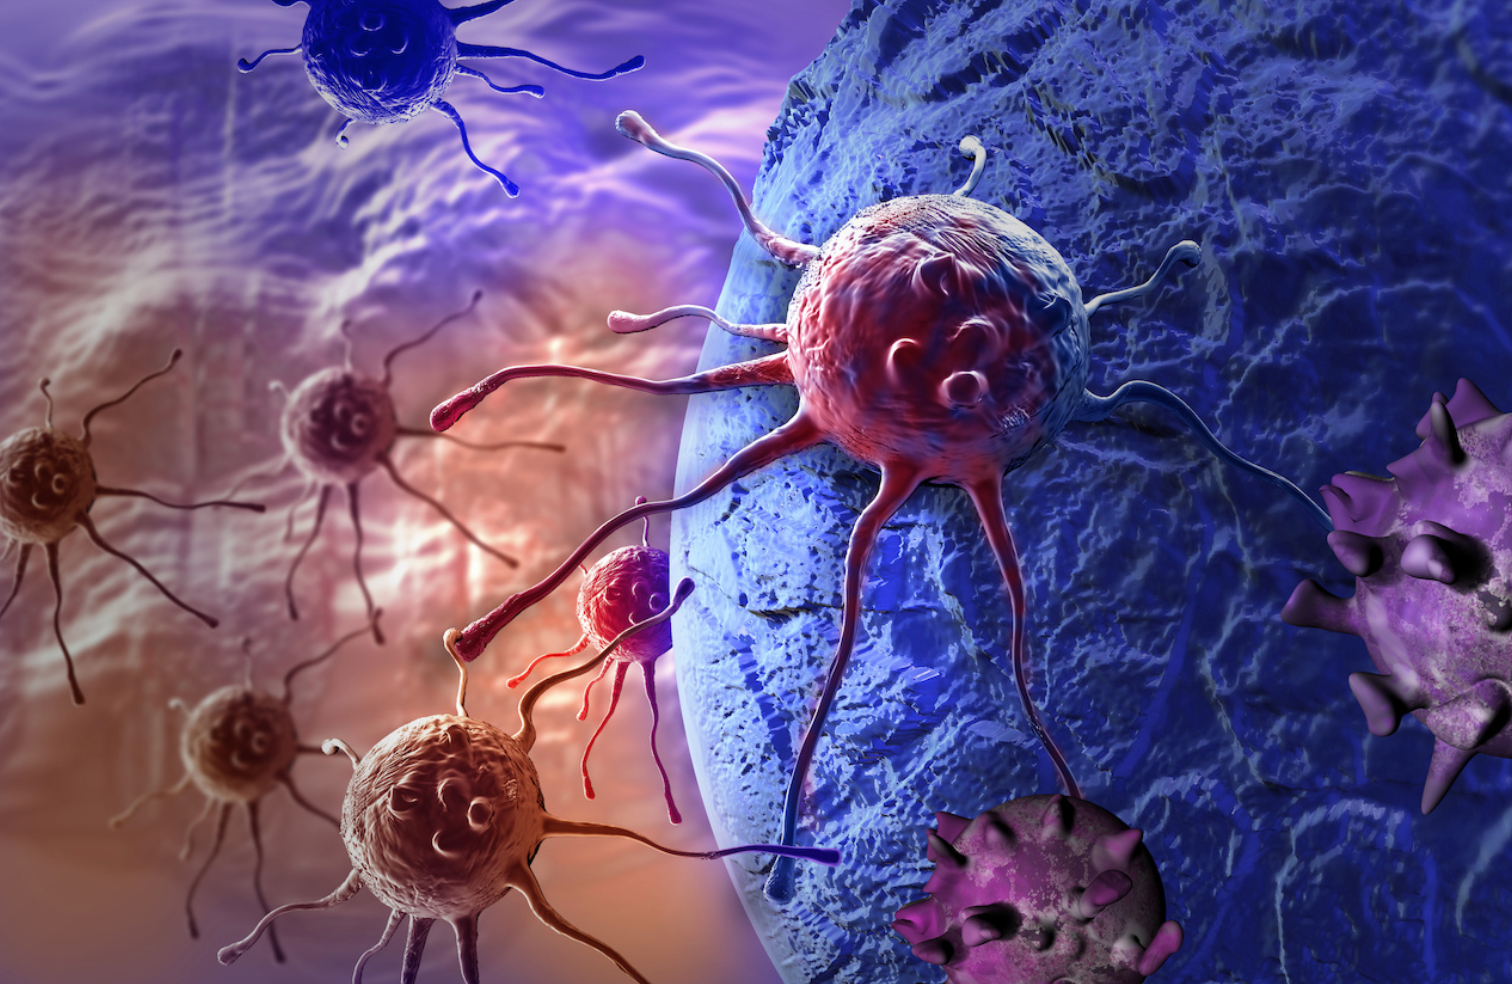 Oncology Overview: Investigational Imlunestrant for Breast Cancer, Endometrial Cancer